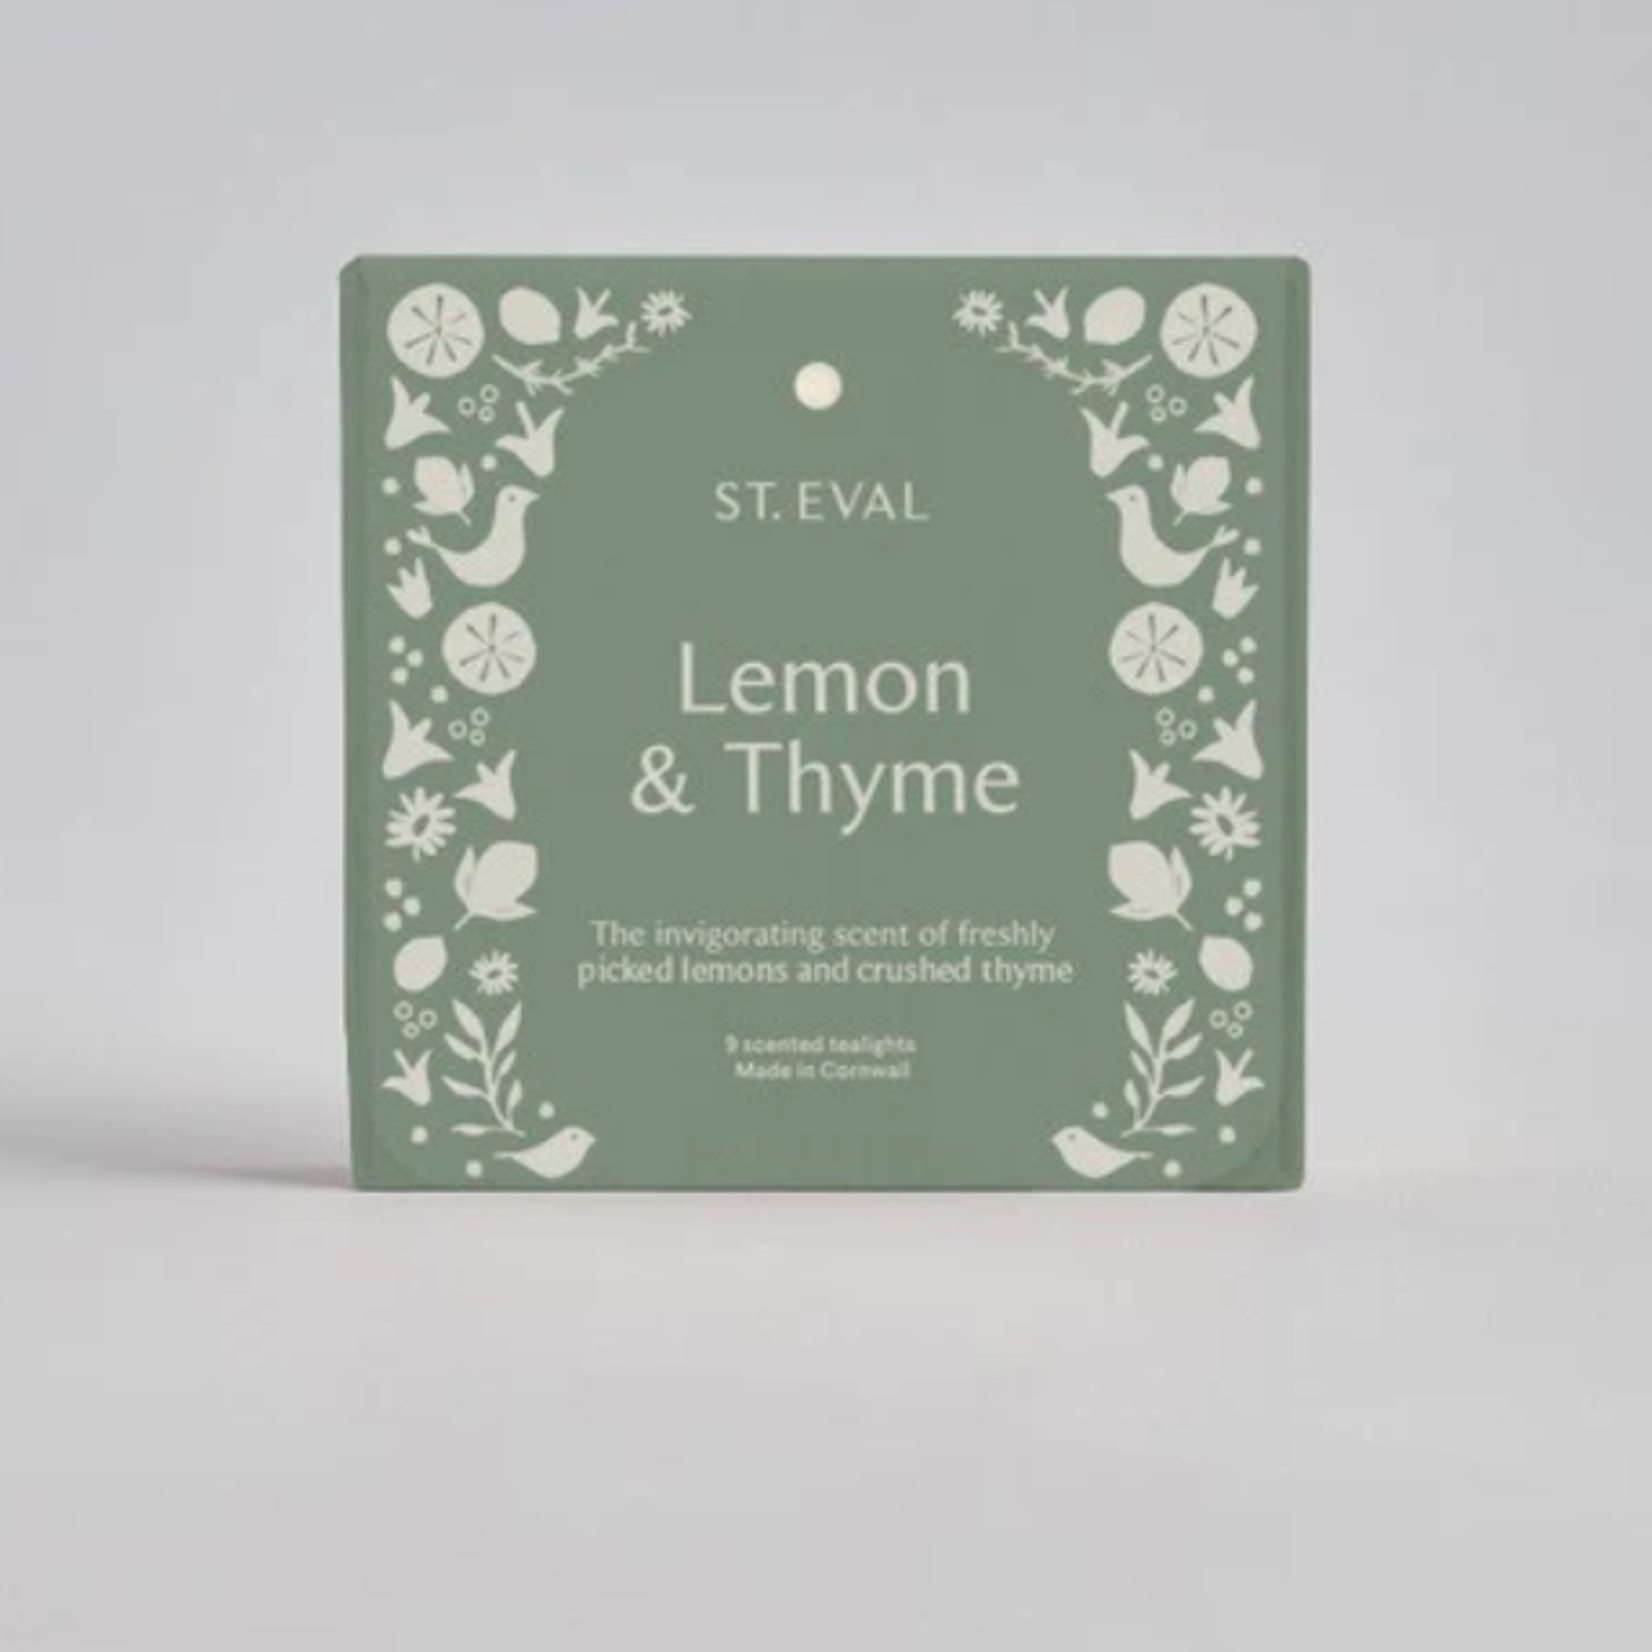 St. Eval St Eval Lemon and Thyme Scented Tealights x9